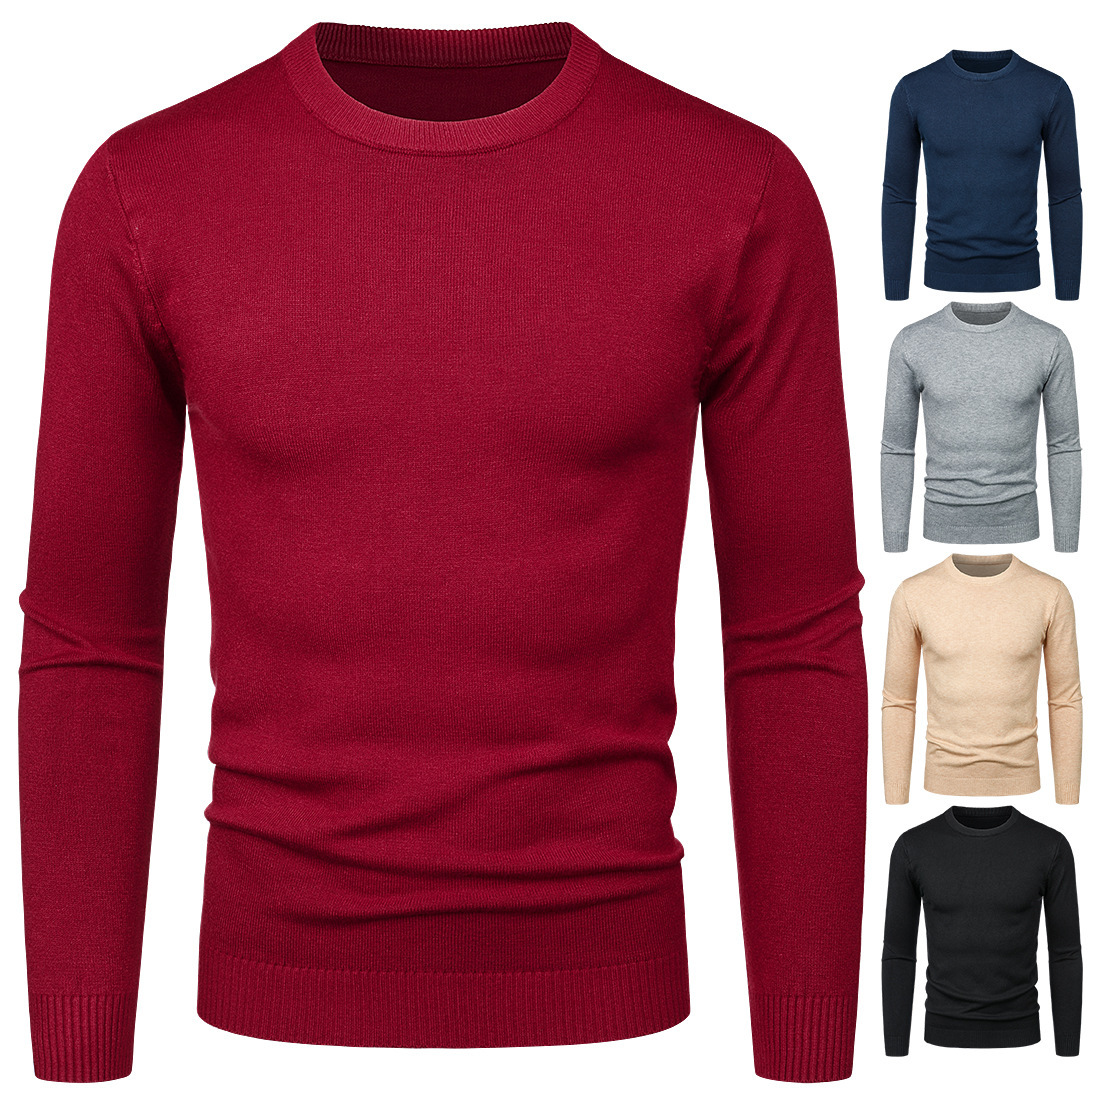 Men's Solid Color Knitting Shirt Cross Border Round Neck One Size Long Sleeve Sweater Underlay Shirt